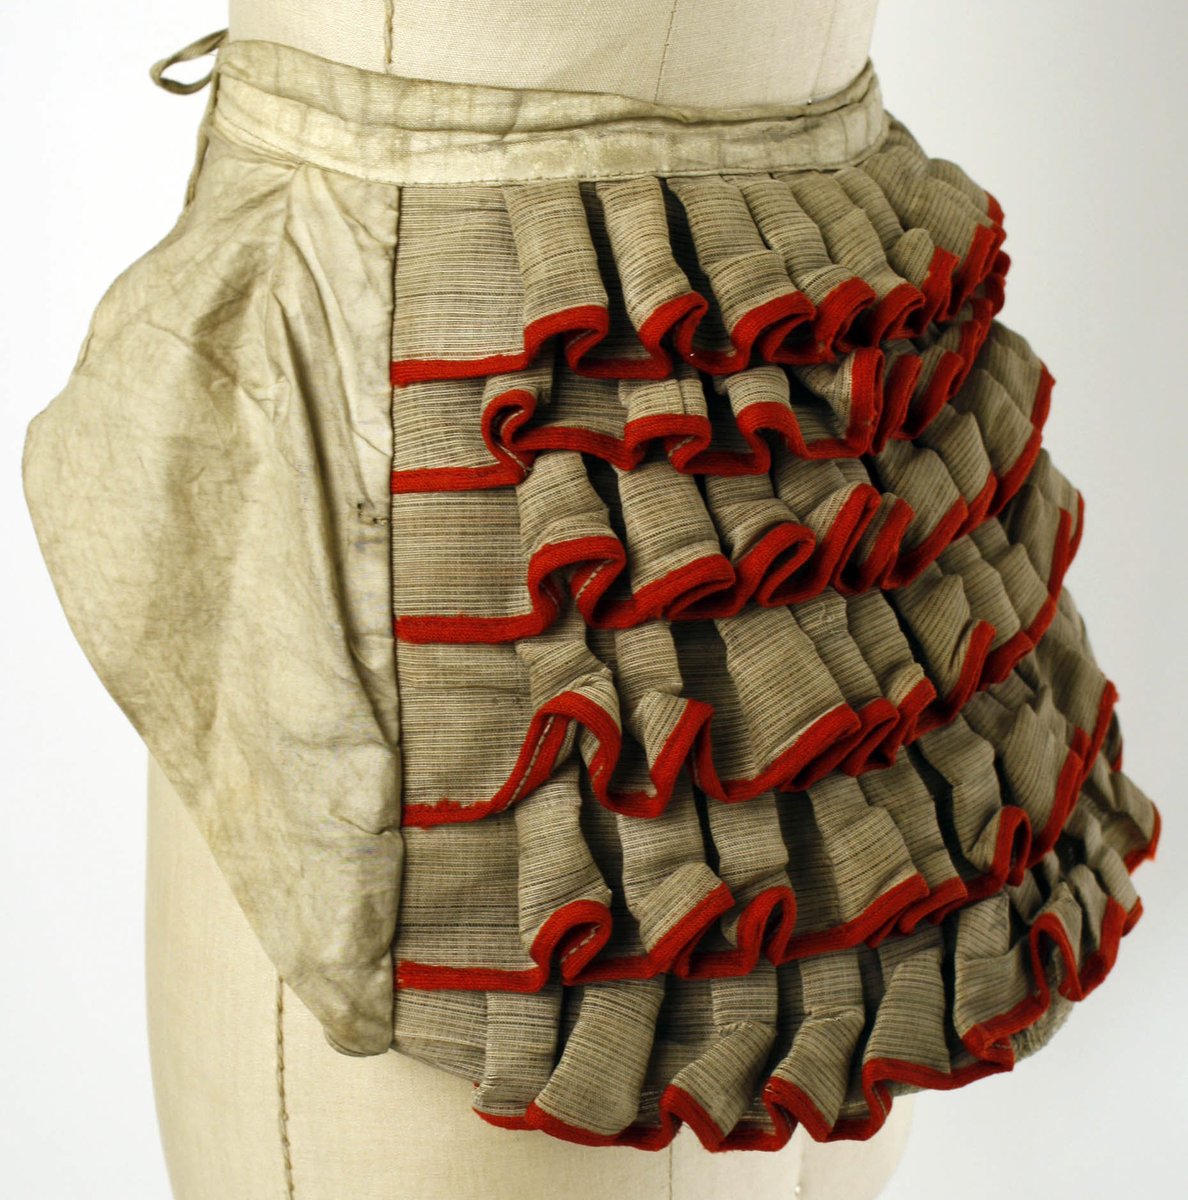 The bustle was worn in different shapes for most of the 1870s and 1880s. The various styles of bustles were made with wires, springs, mohair padding and fabric.